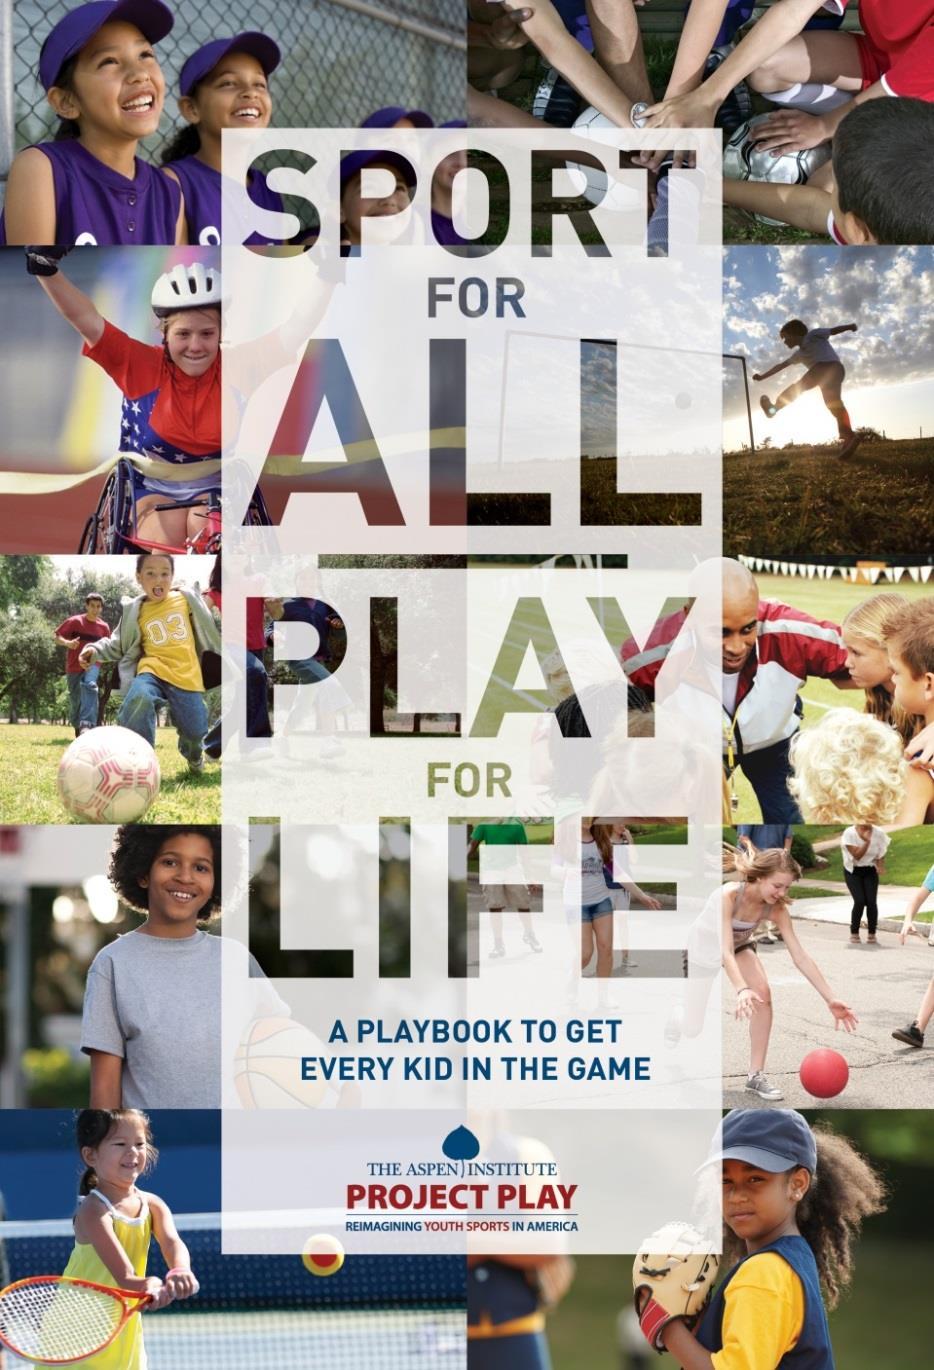 The Playbook Nation s first crosssector framework for action for youth sports Values: Health, inclusion